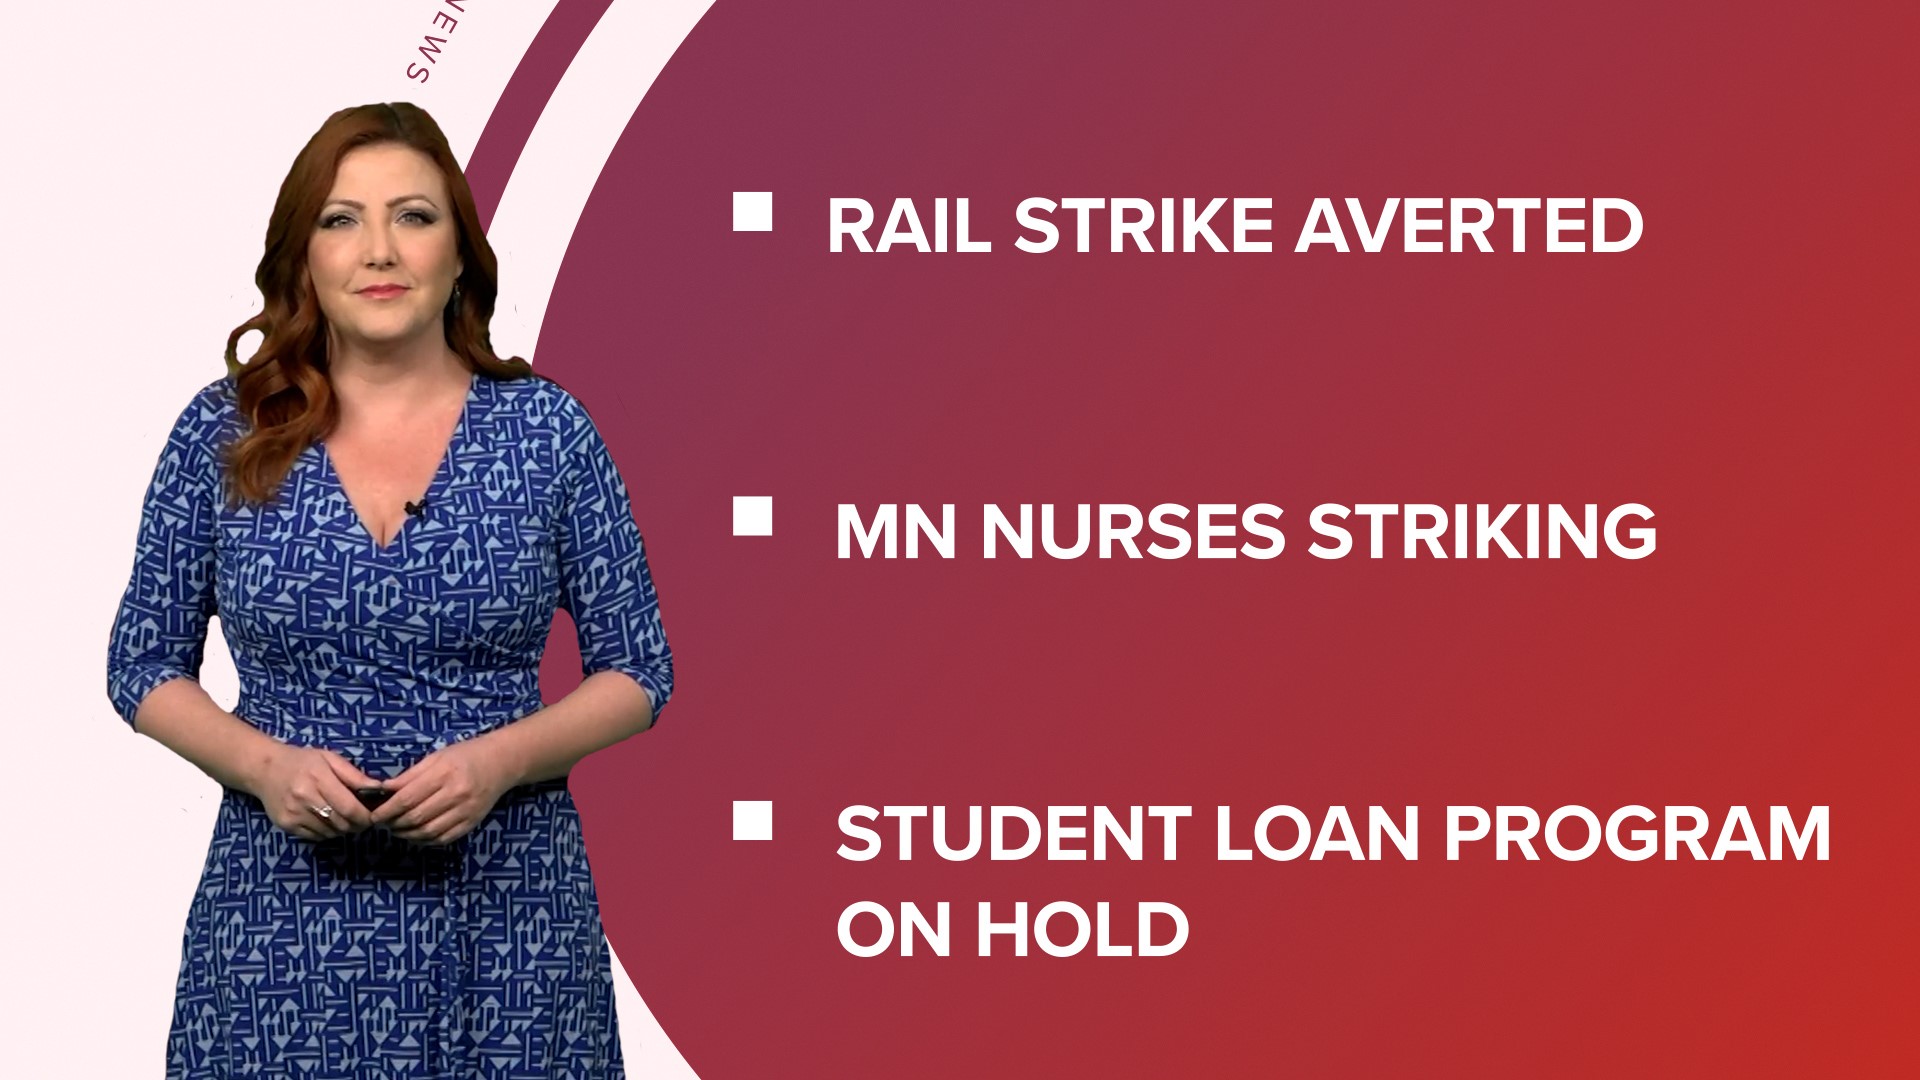 A look at what is happening in the news from a rail strike averted to President Biden's student loan debt program on hold.